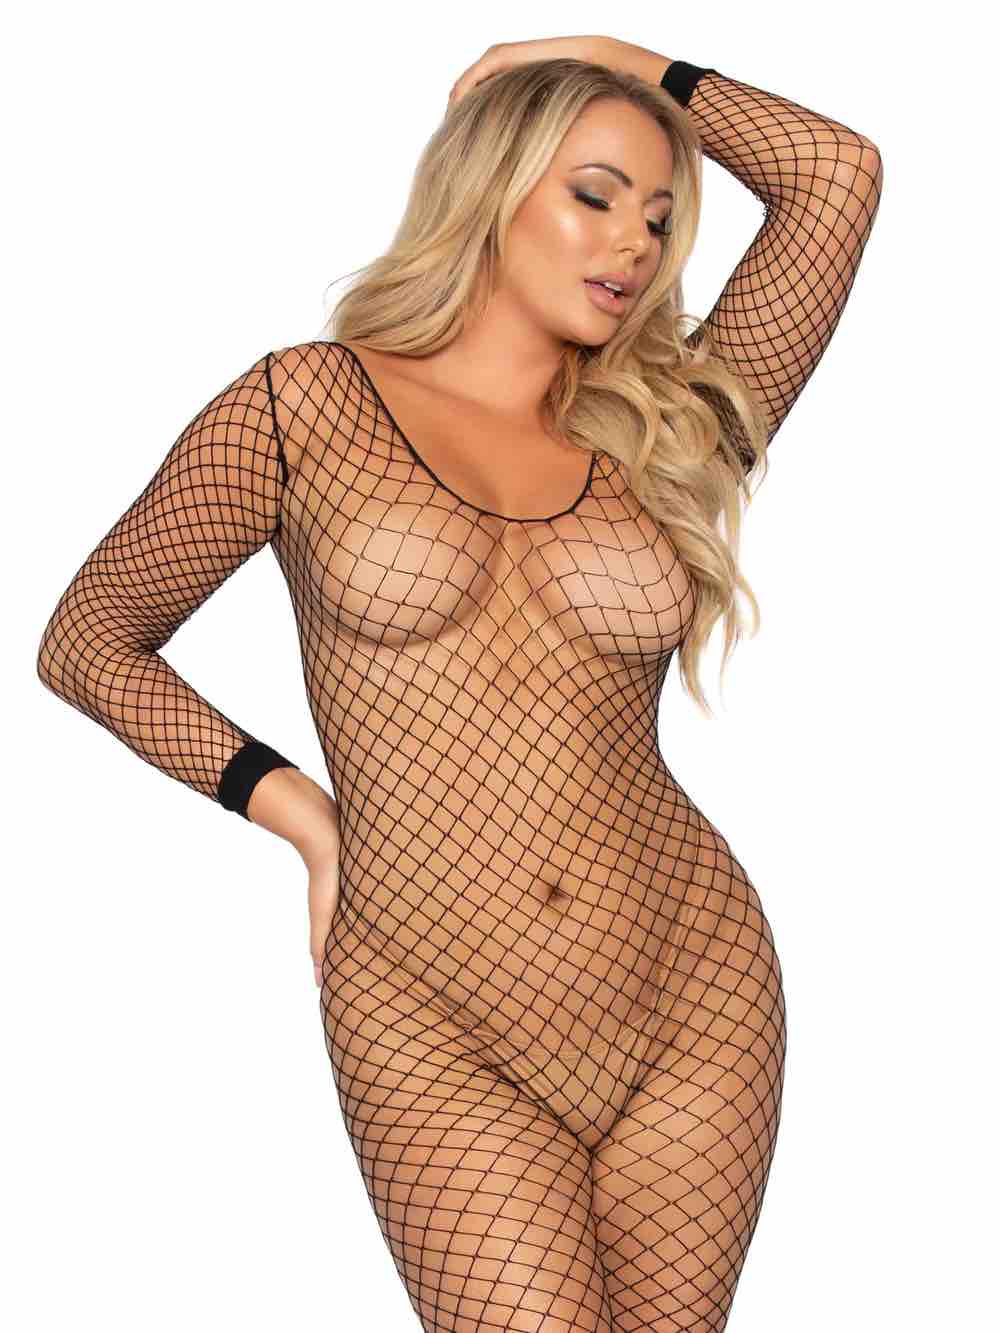 A model wearing the Ls Industrial Net Bodystocking, front view.